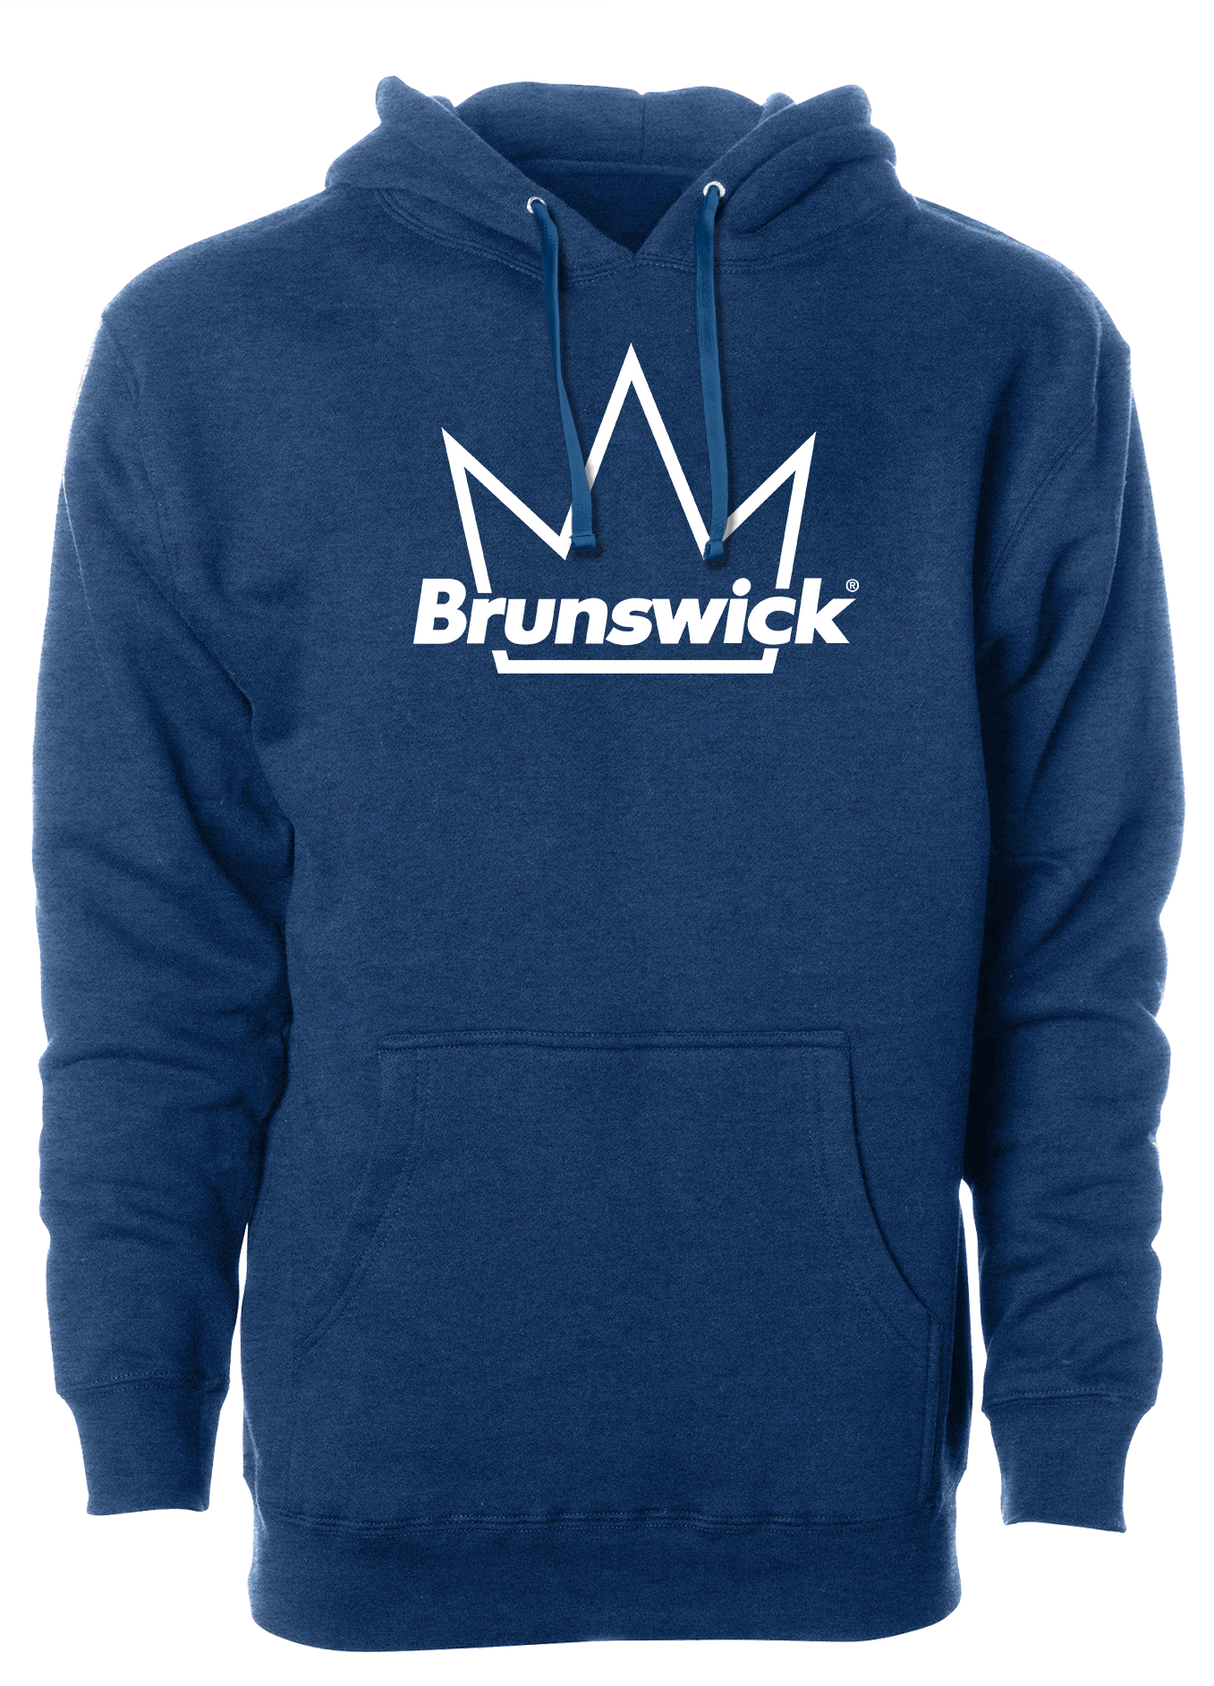 Keep warm in this stylish Brunswick Crown Logo design hooded sweatshirt. 60/40 cotton/polyester blend material Standard Fit  Front pouch pocket Midweight Hoodie/Hooded Sweatshirt. brunswick bowling hoodie hooded sweatshirt big b team shirt comfortable clothing amazon ebay 